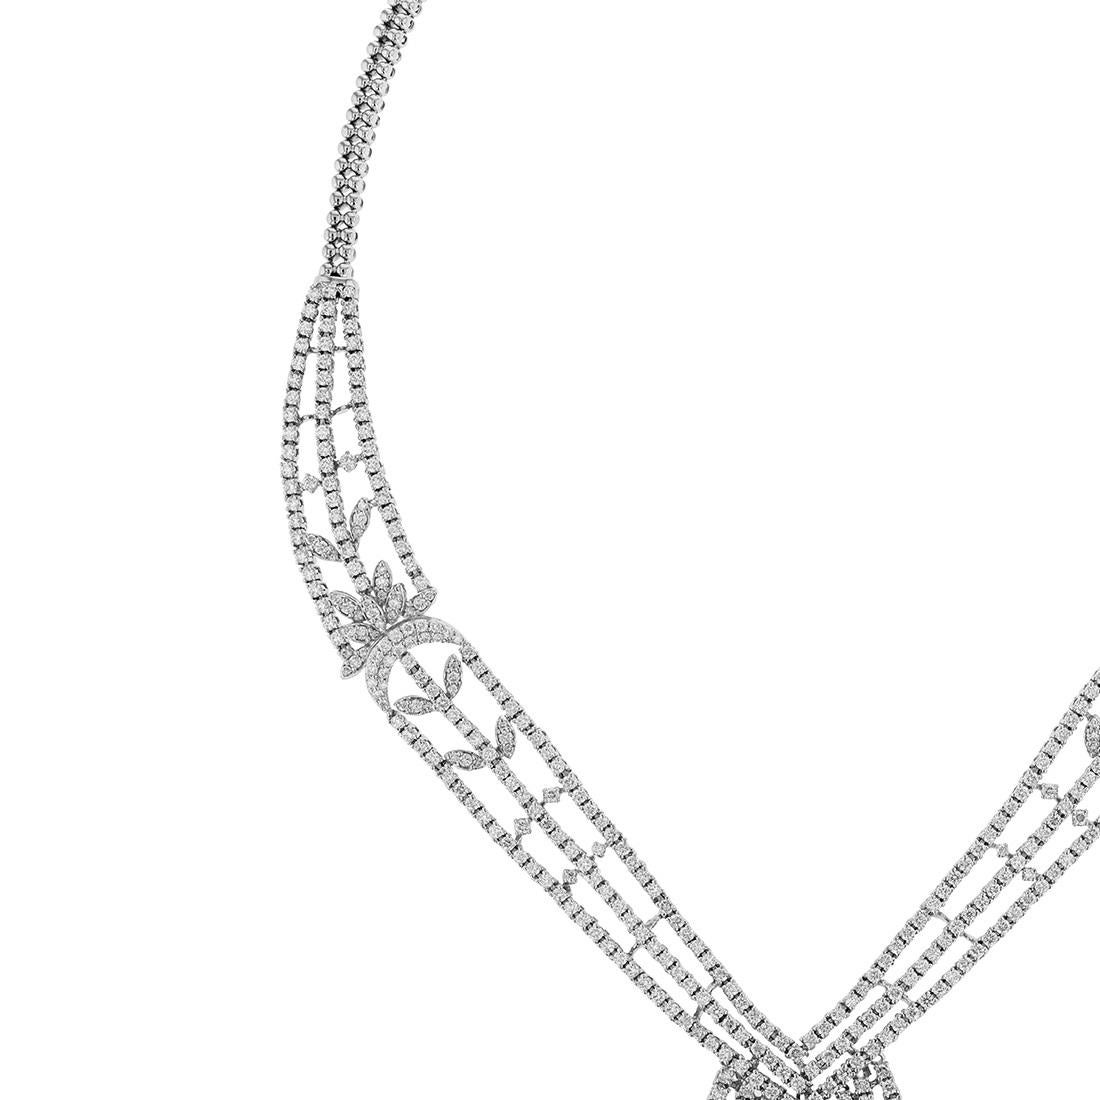 This necklace is made in 14K white gold and features 756 round cut diamonds weighing 16.09 carats combined. Necklace has a color grade (H). and clarity grade (SI2). All stones are prong set
